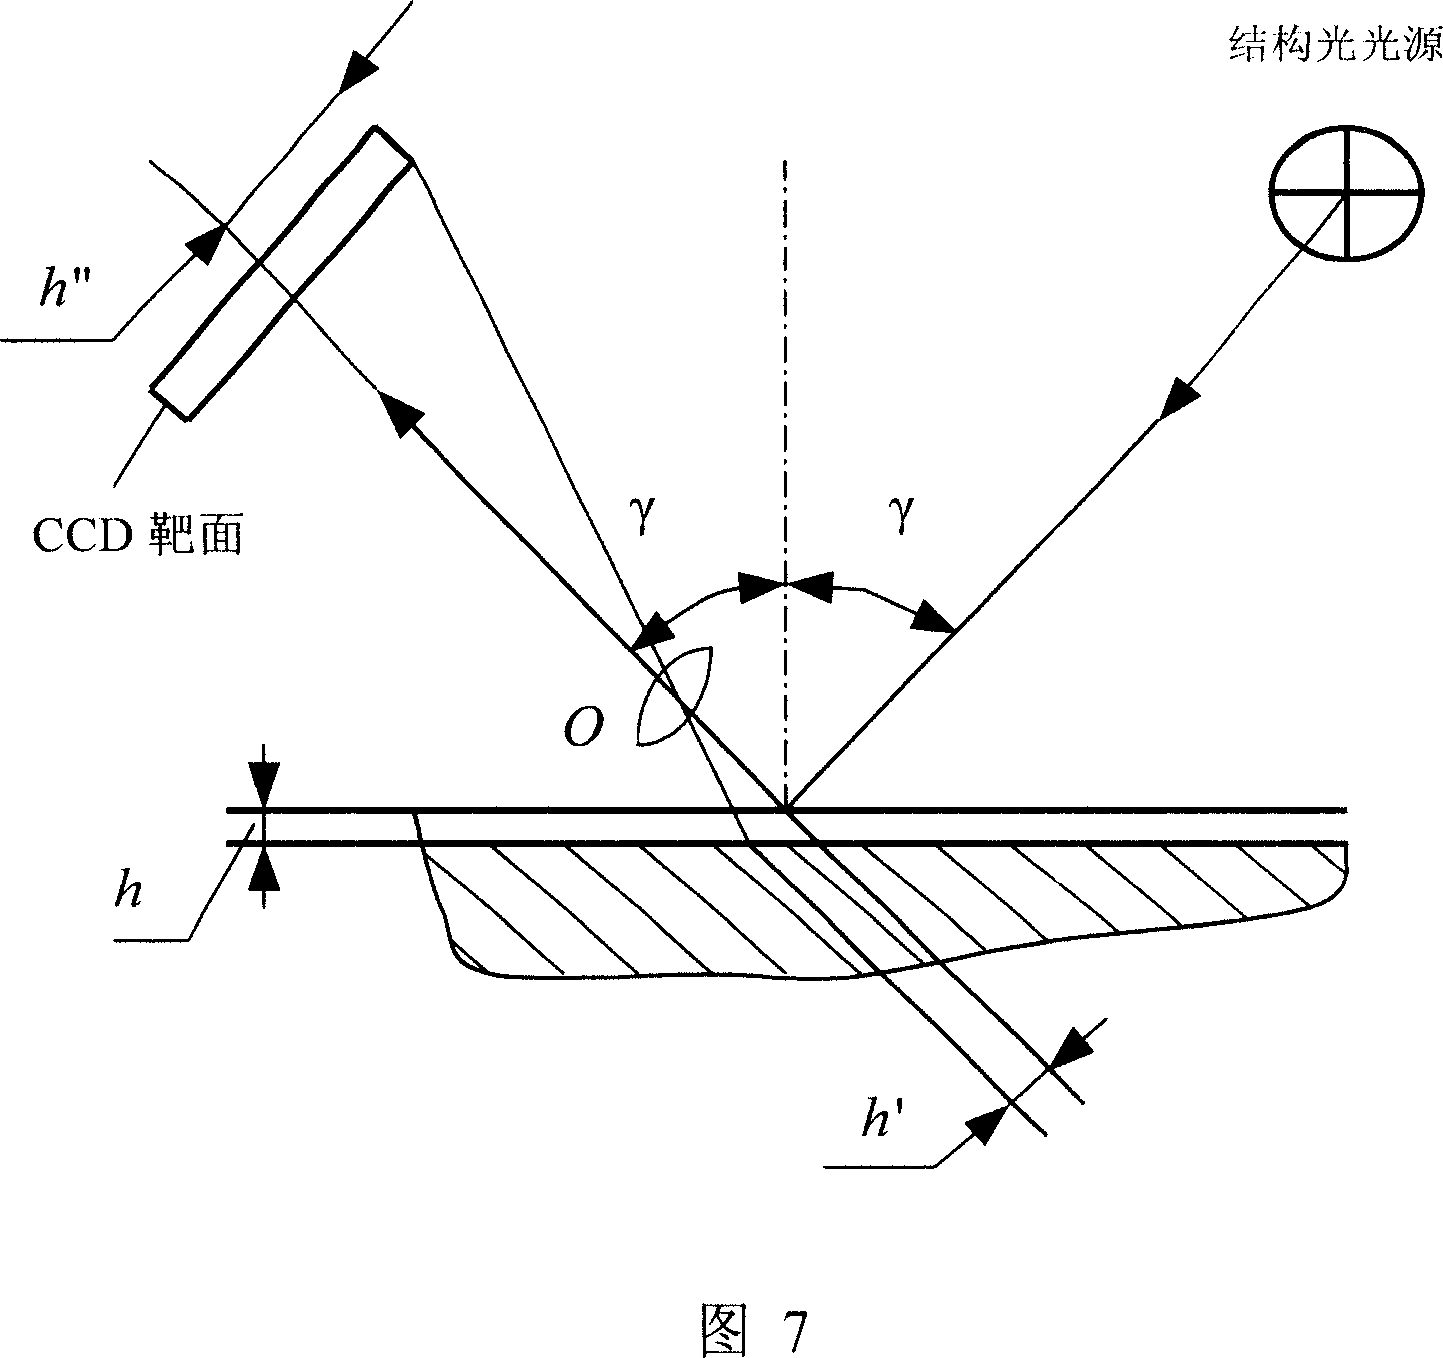 Method for detecting 3D defects on surface of belt material